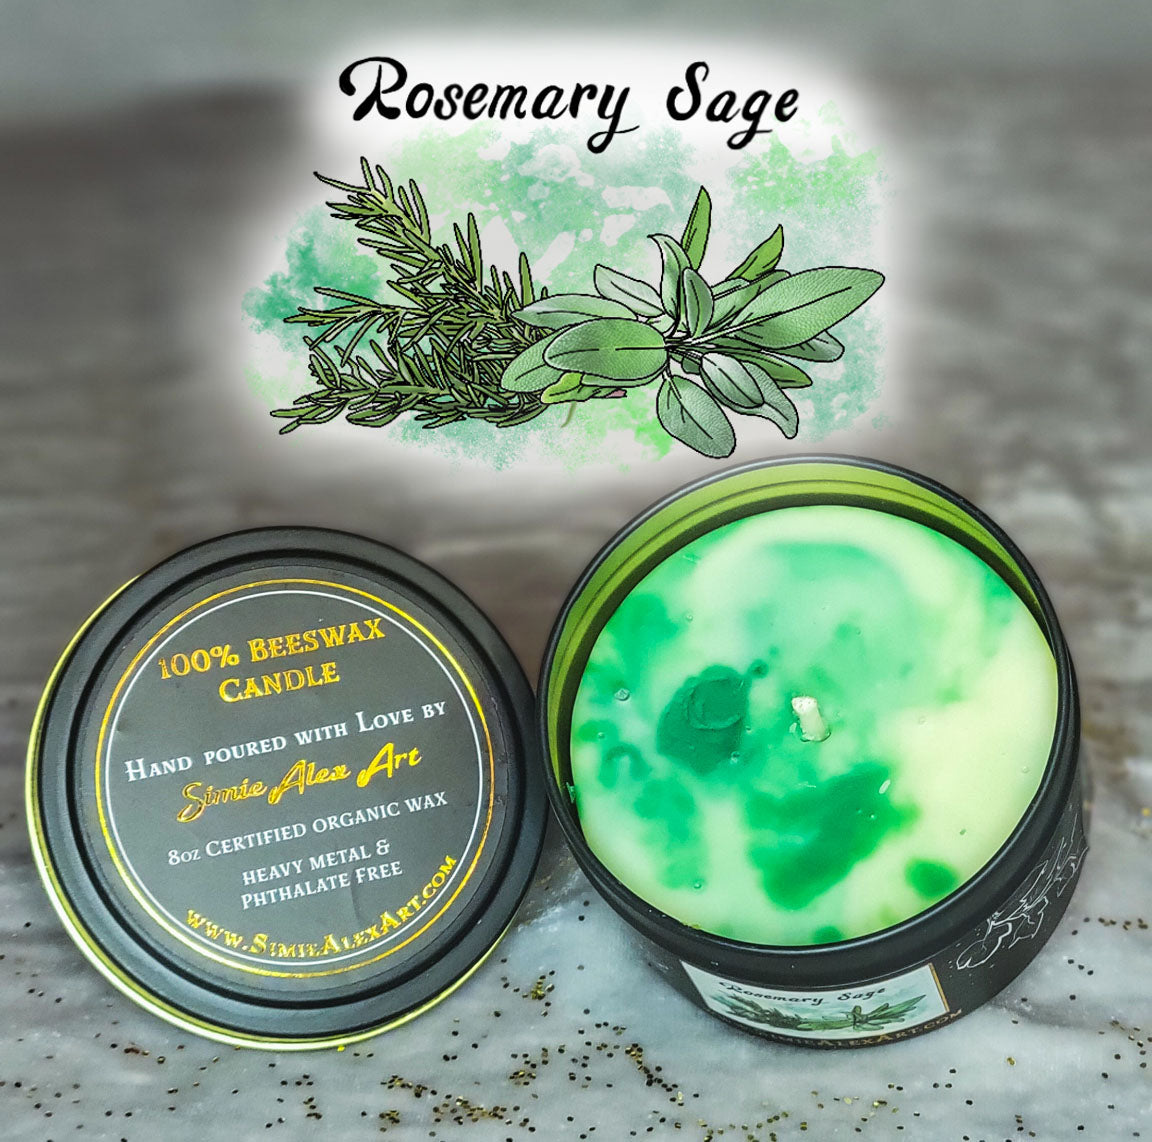 Rosemary Sage Beeswax Candlem